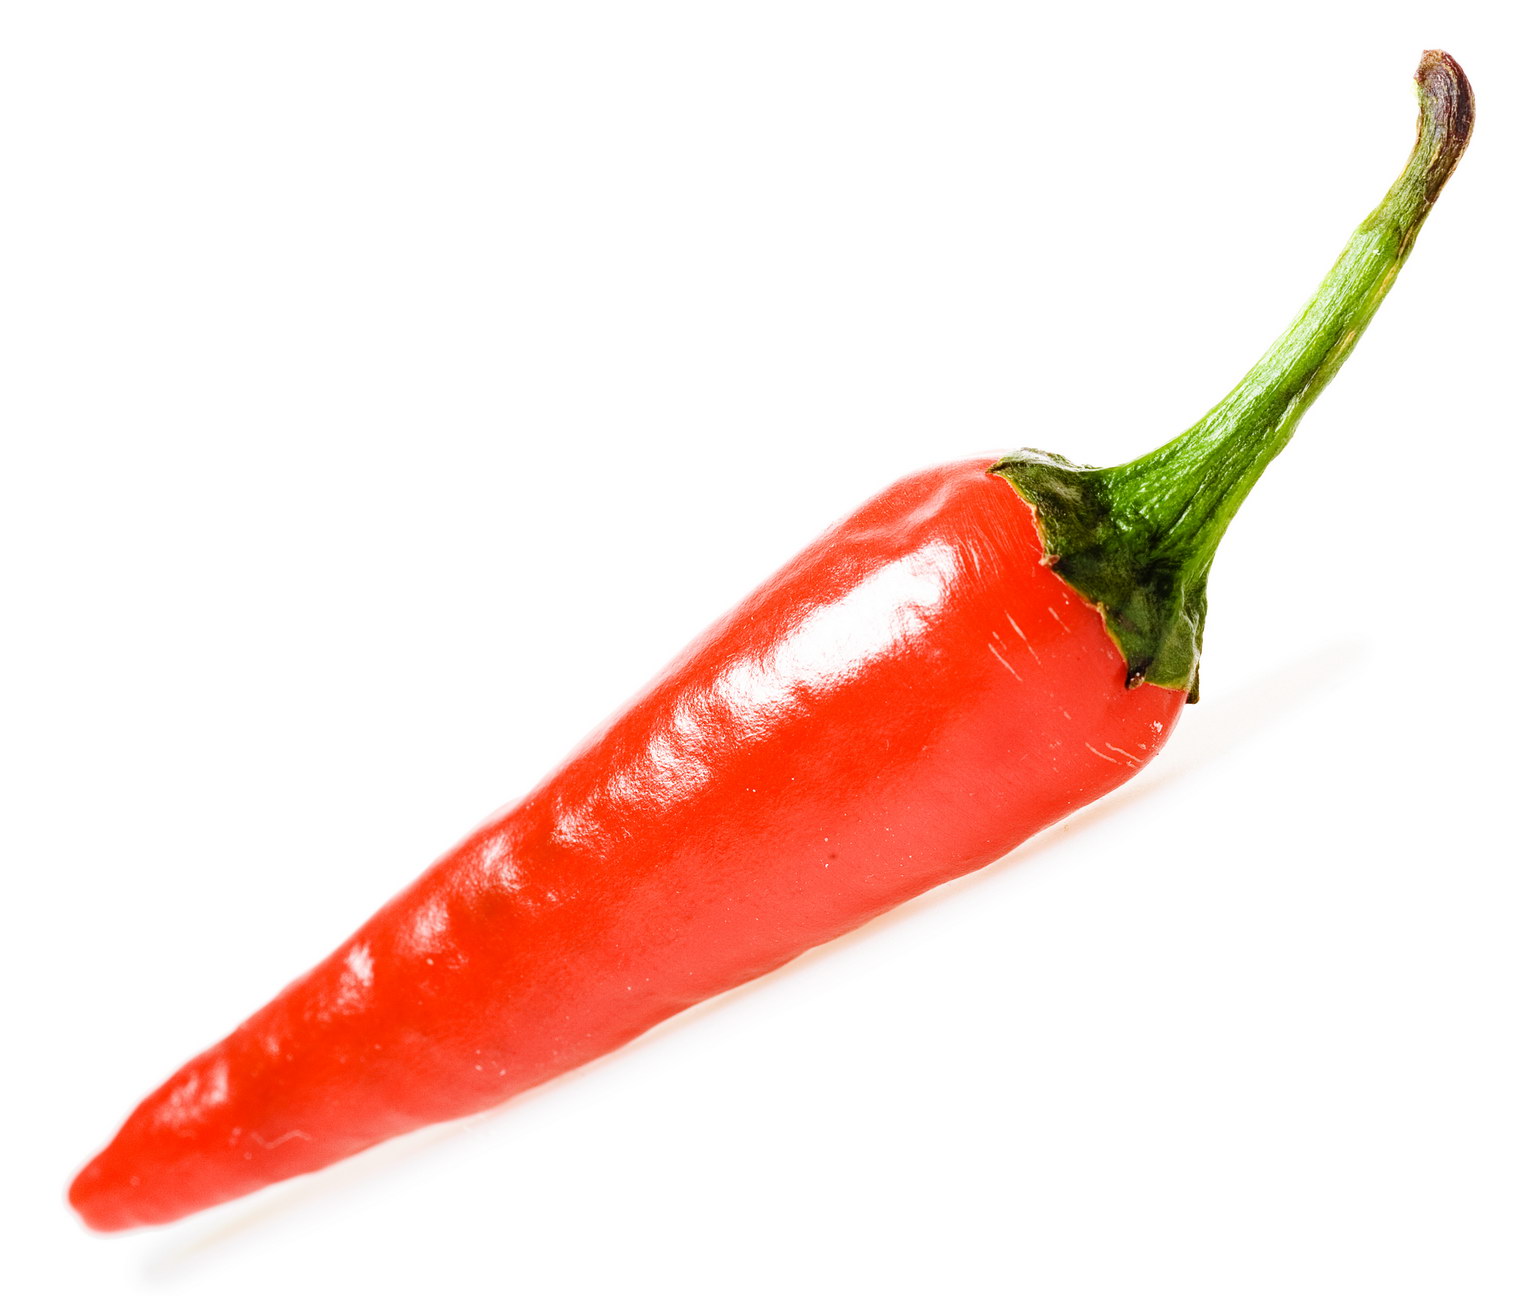 Red chilli pepper, Burning, Isolated, Studio, Spice, HQ Photo